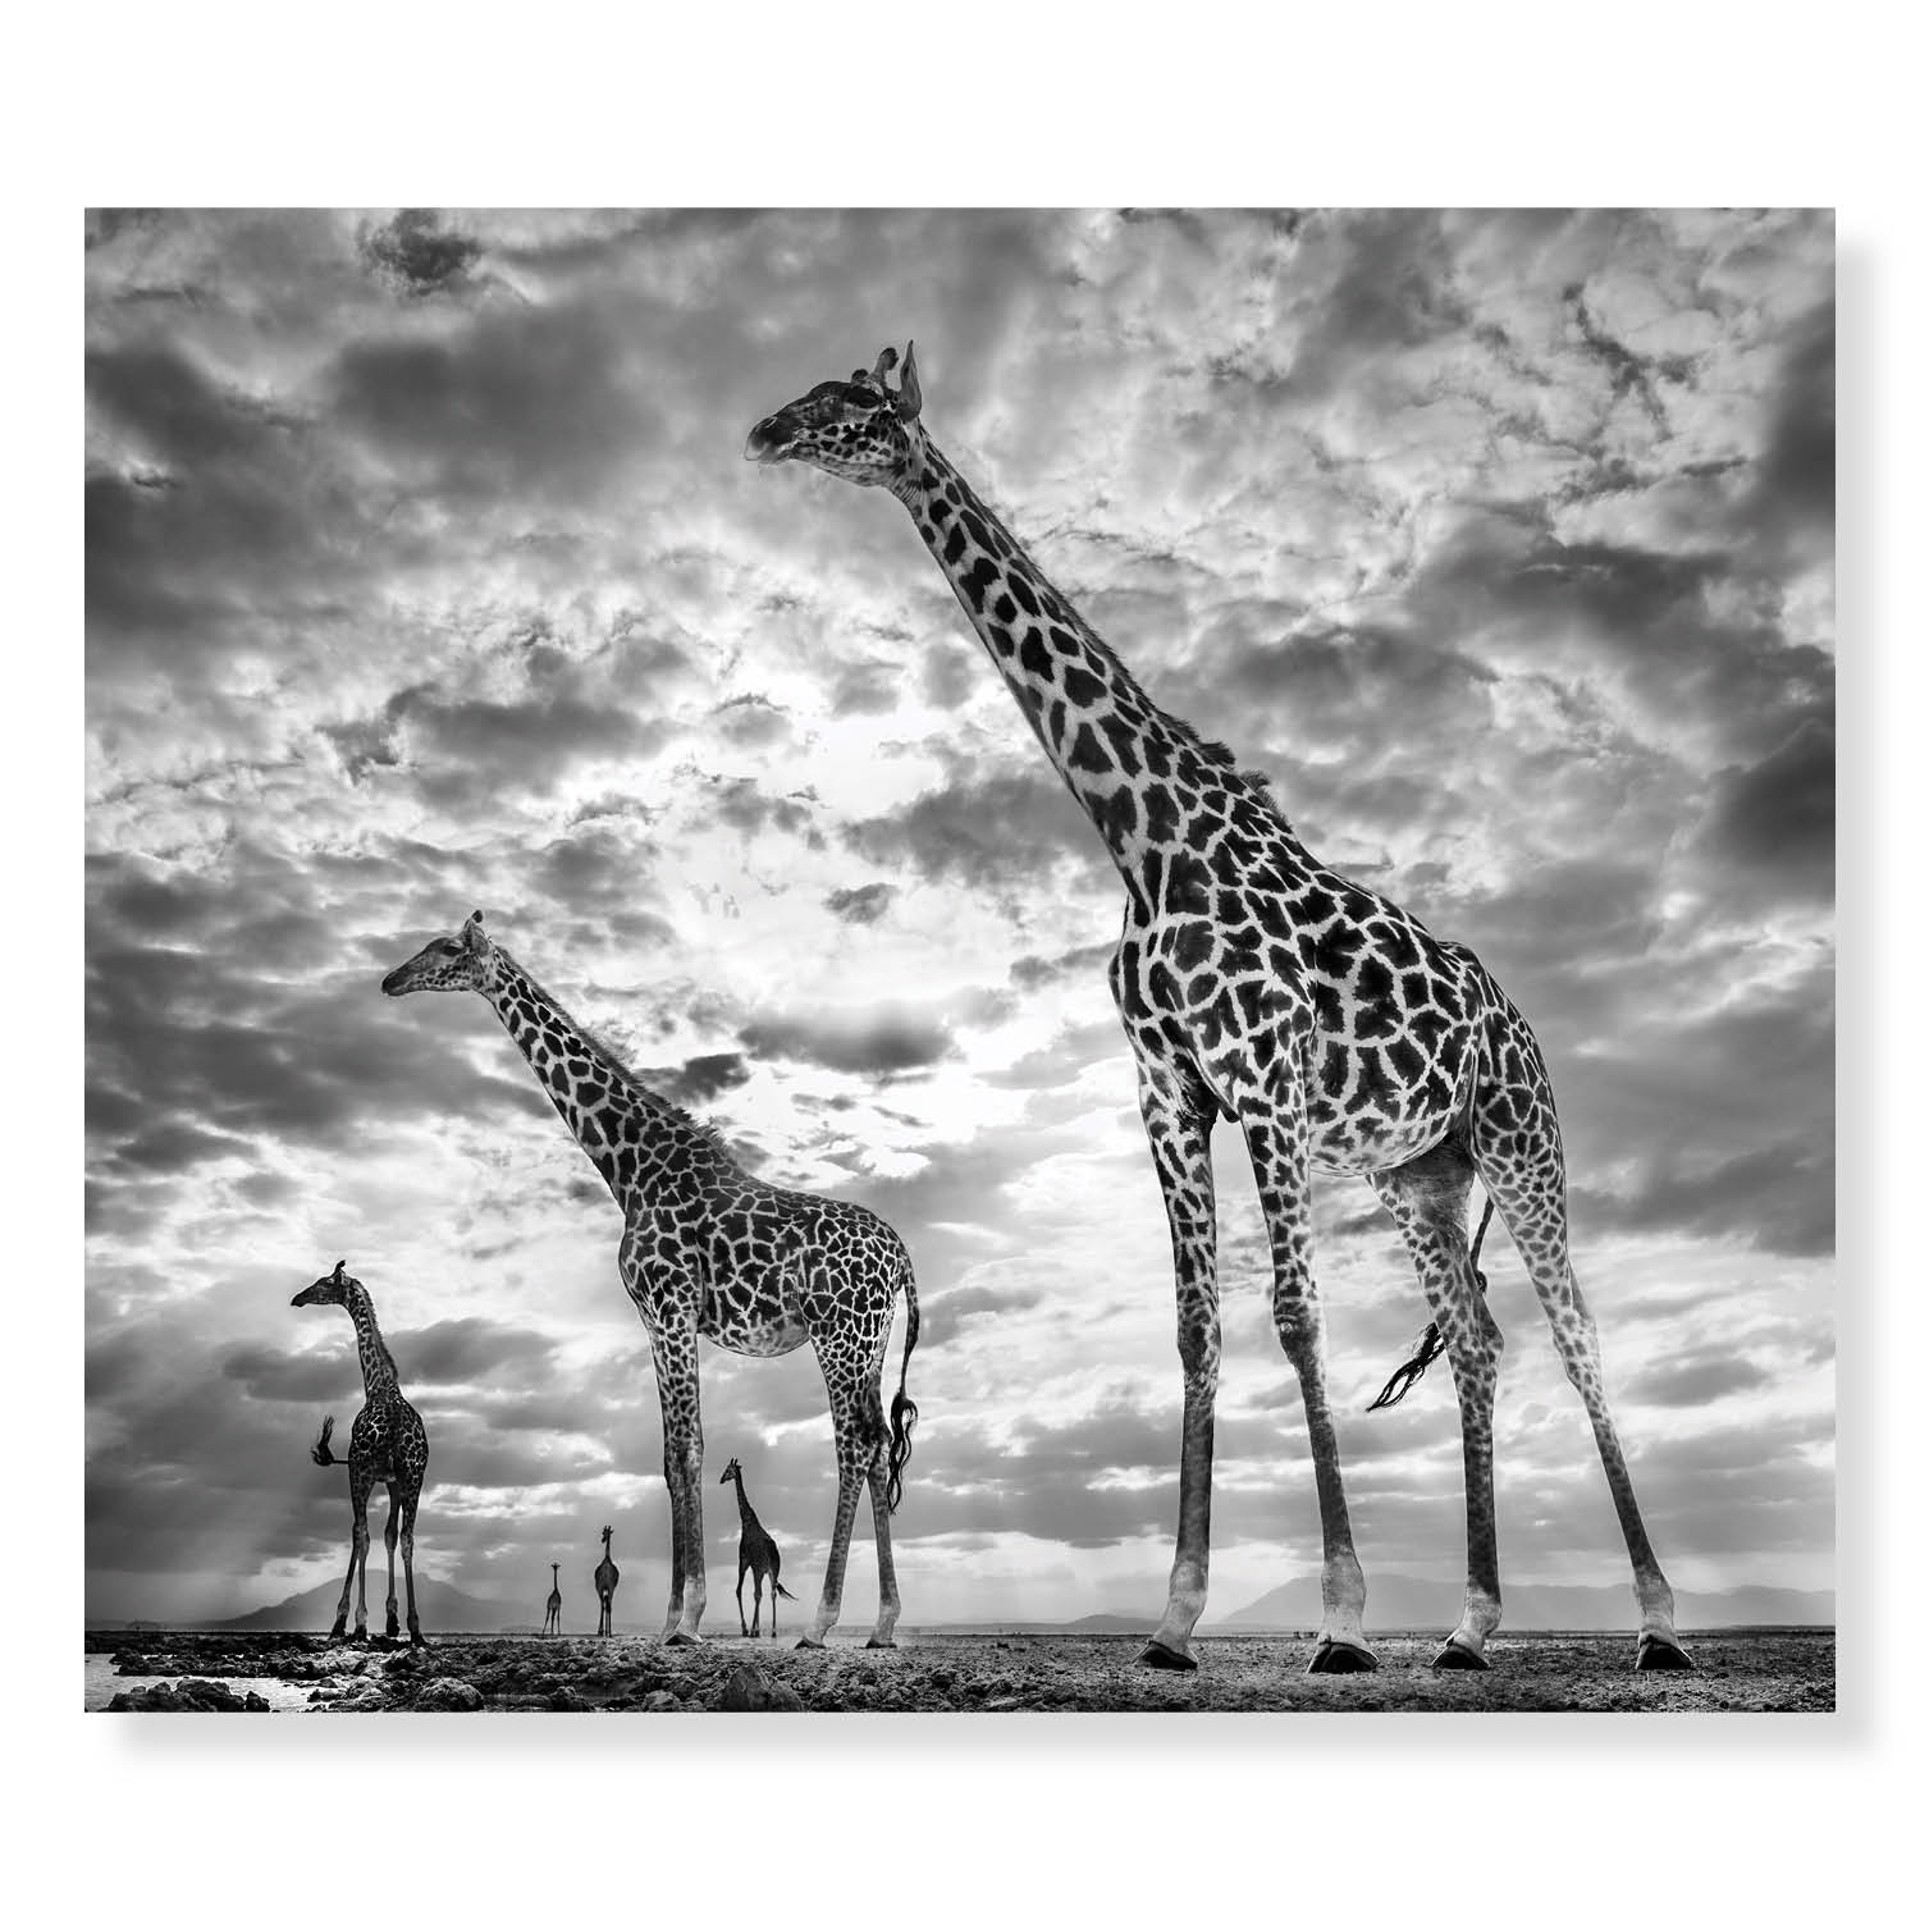 Keeping Up With The Crouches by David Yarrow